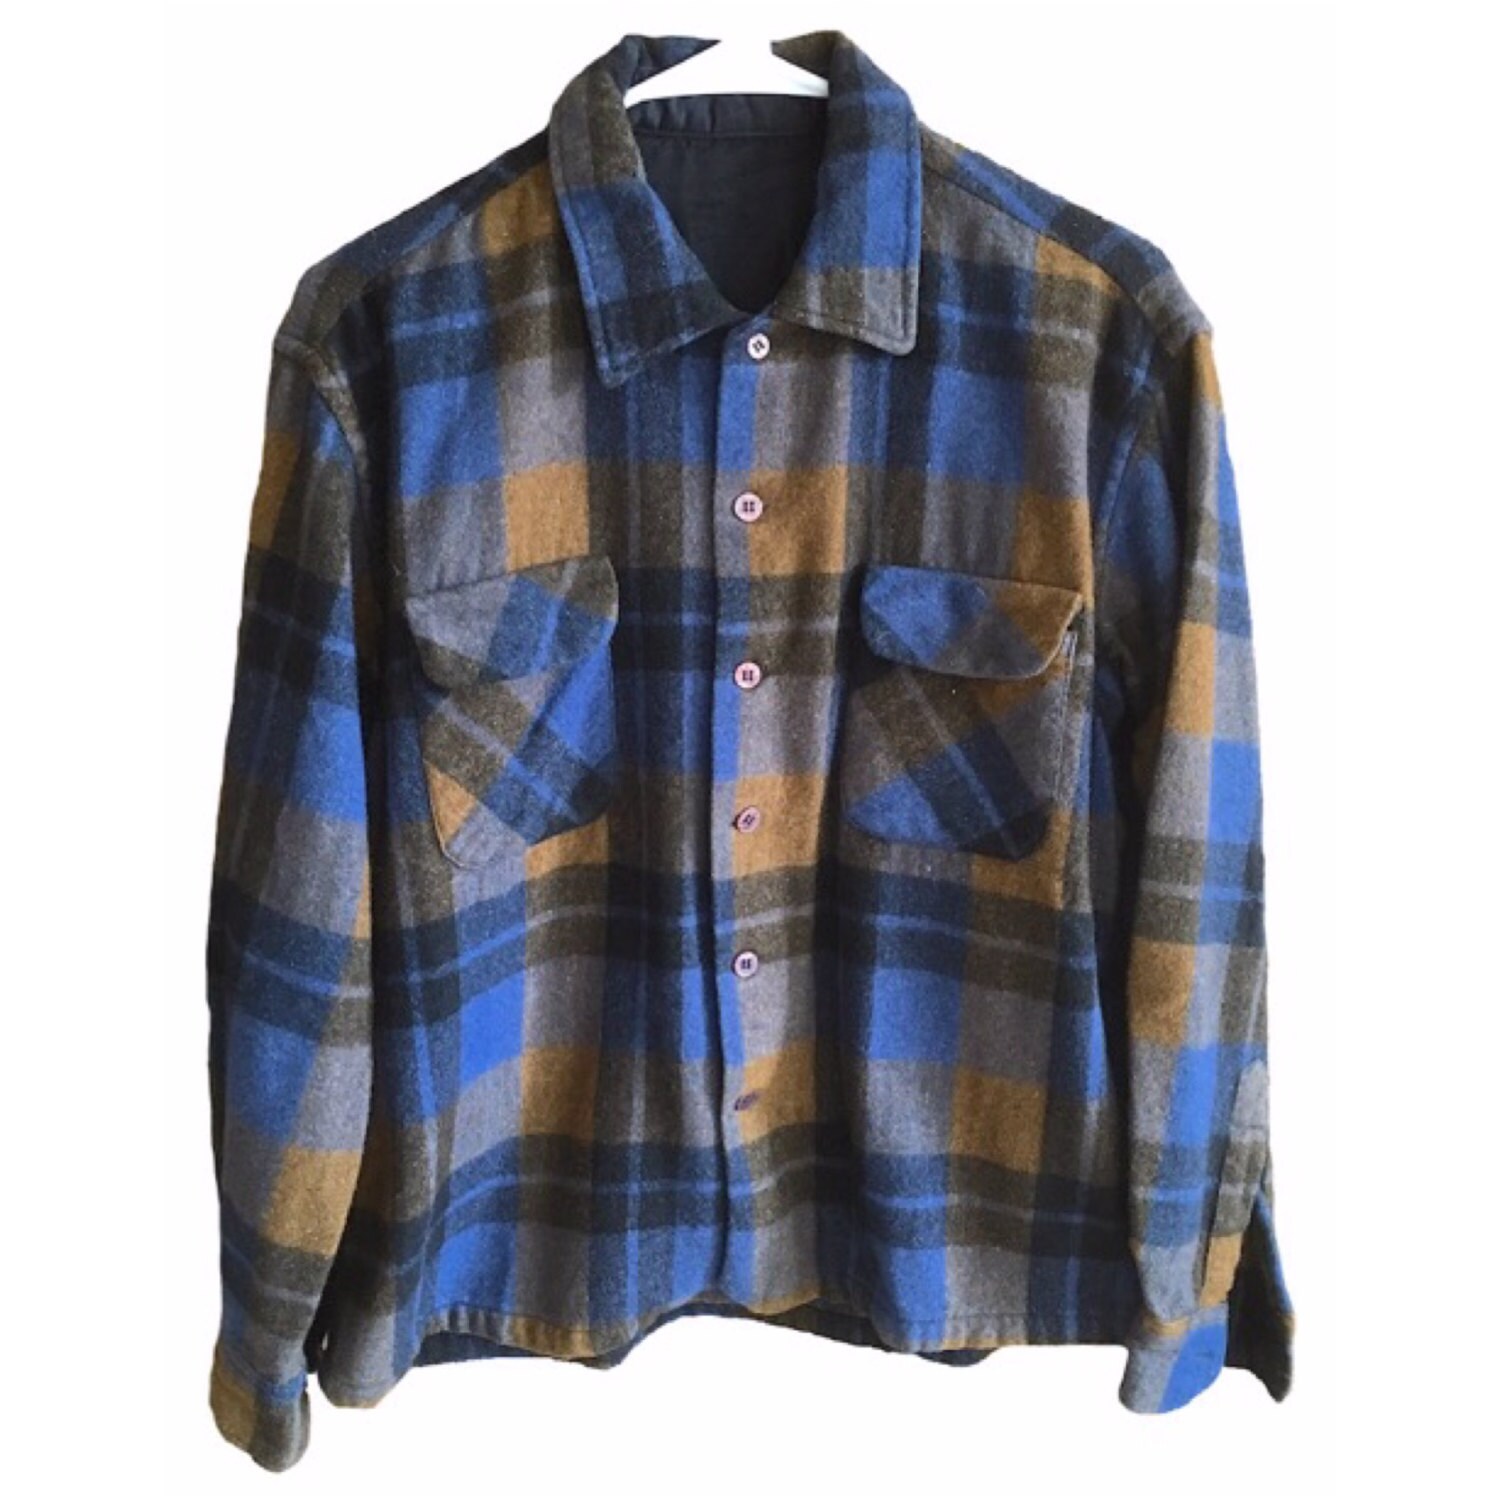 Pendleton Flannel blue and yellow plaid size large long sleeve